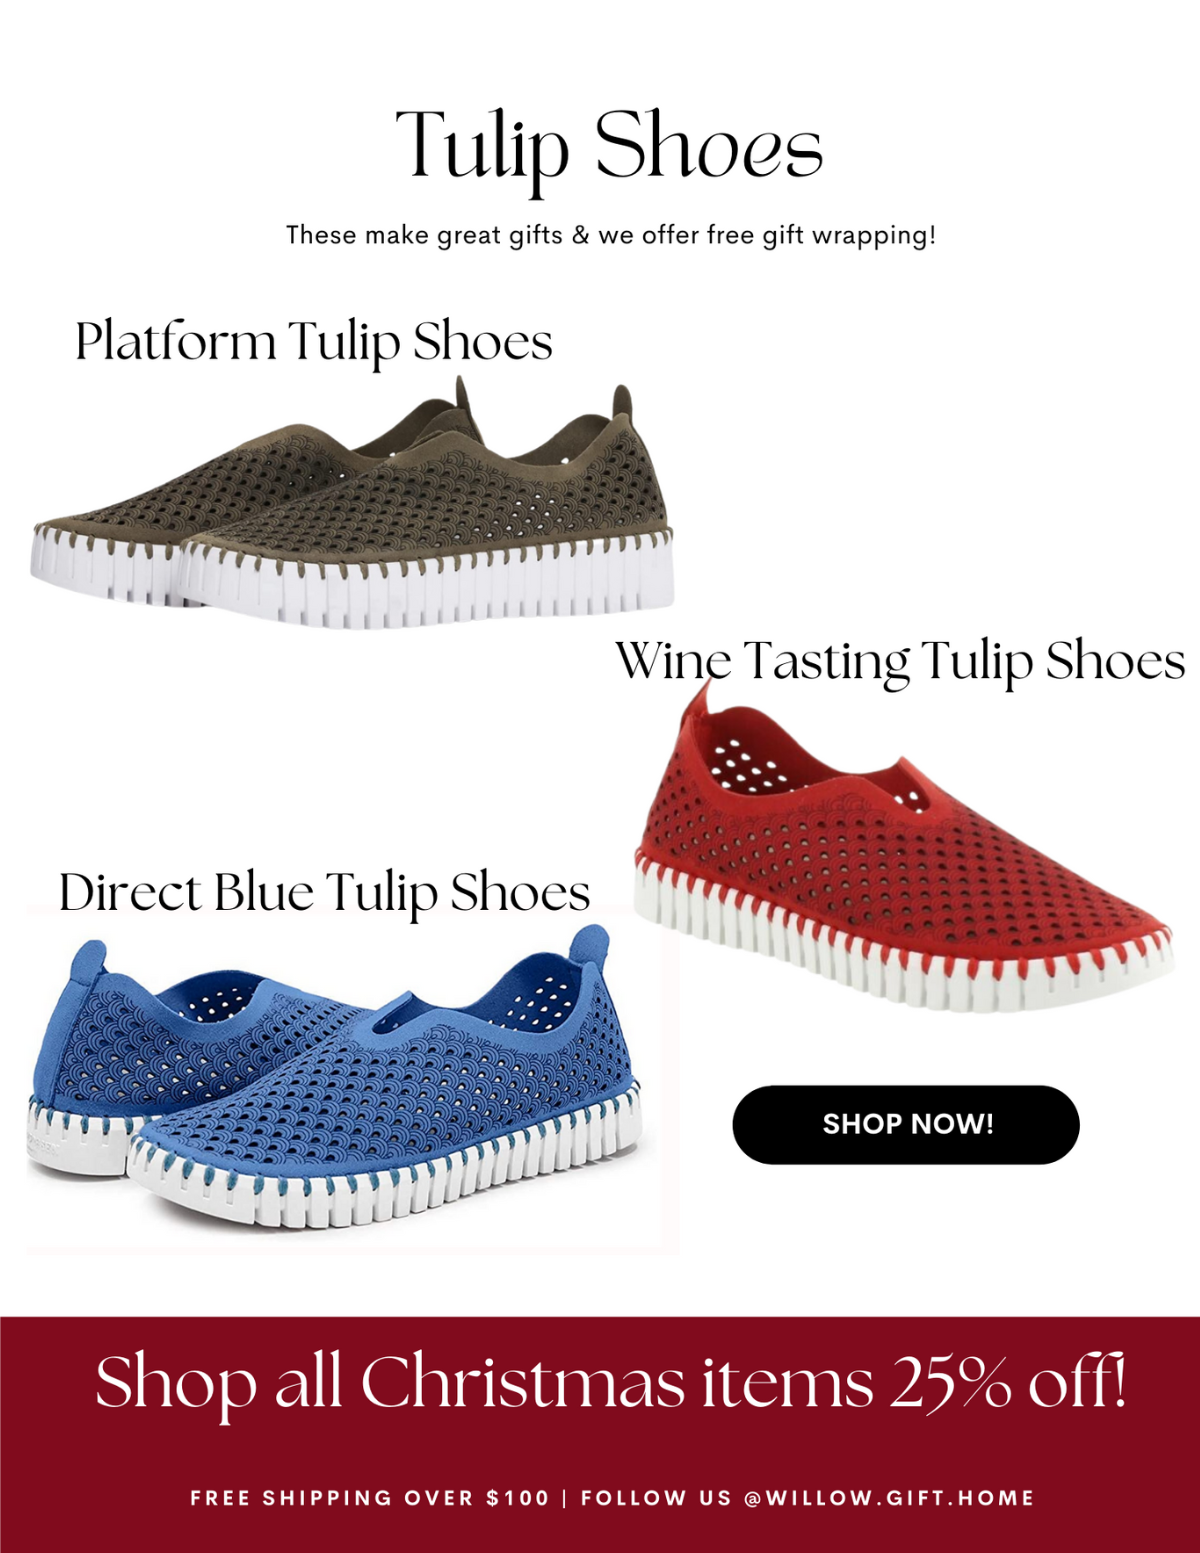 40% off Tulip Shoes